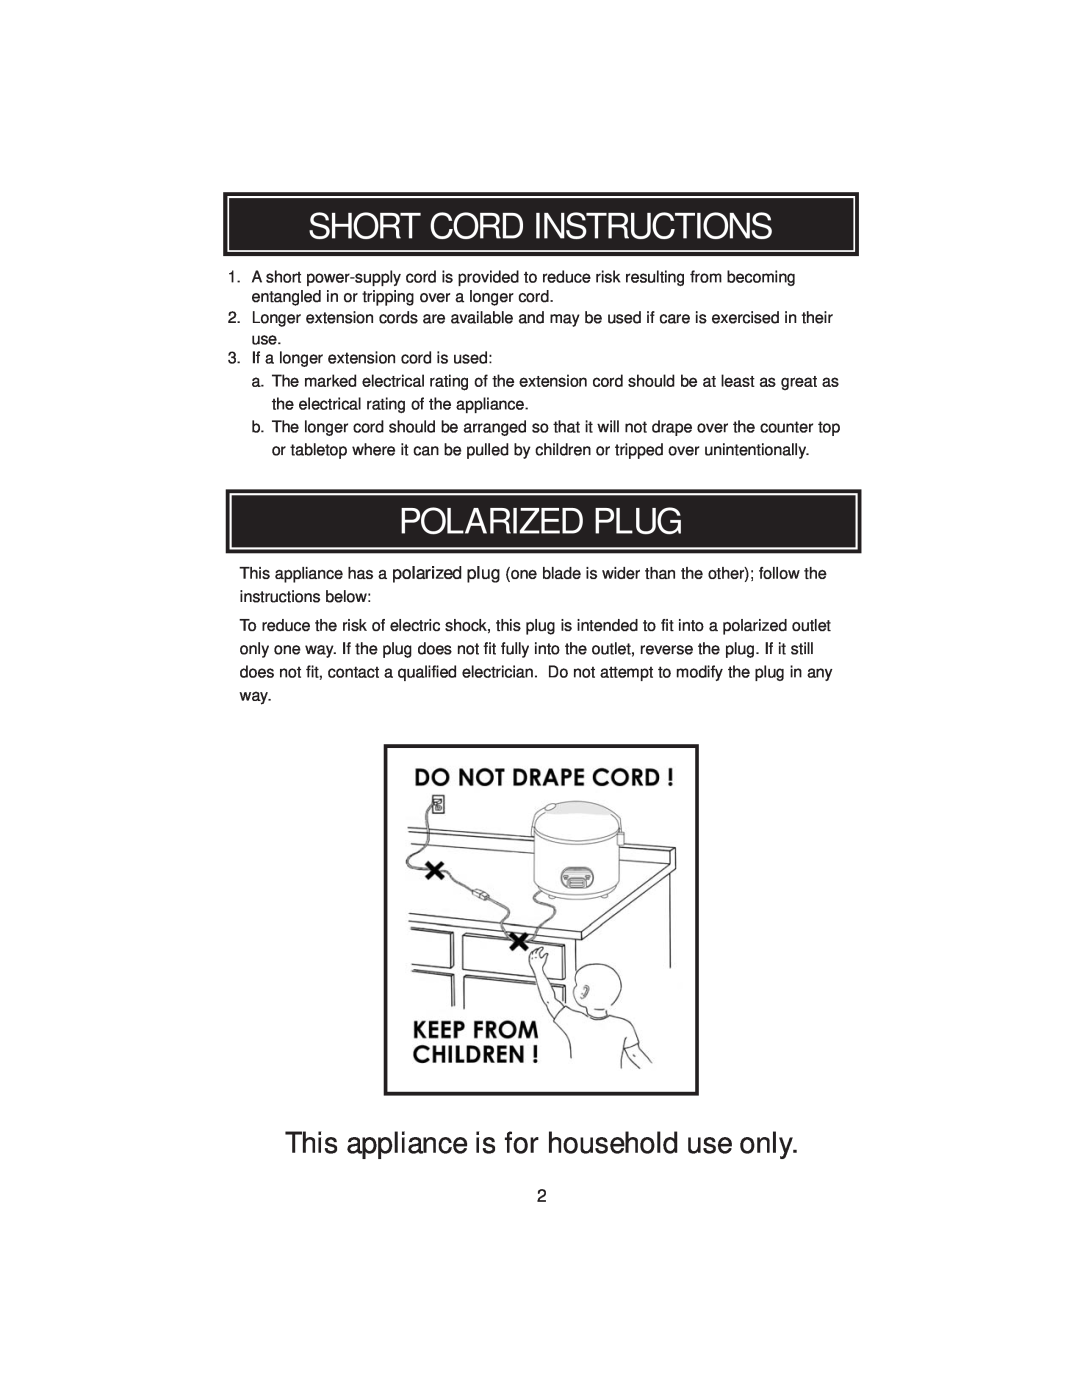 Aroma ARC3946 instruction manual Short Cord Instructions, Polarized Plug, This appliance is for household use only 